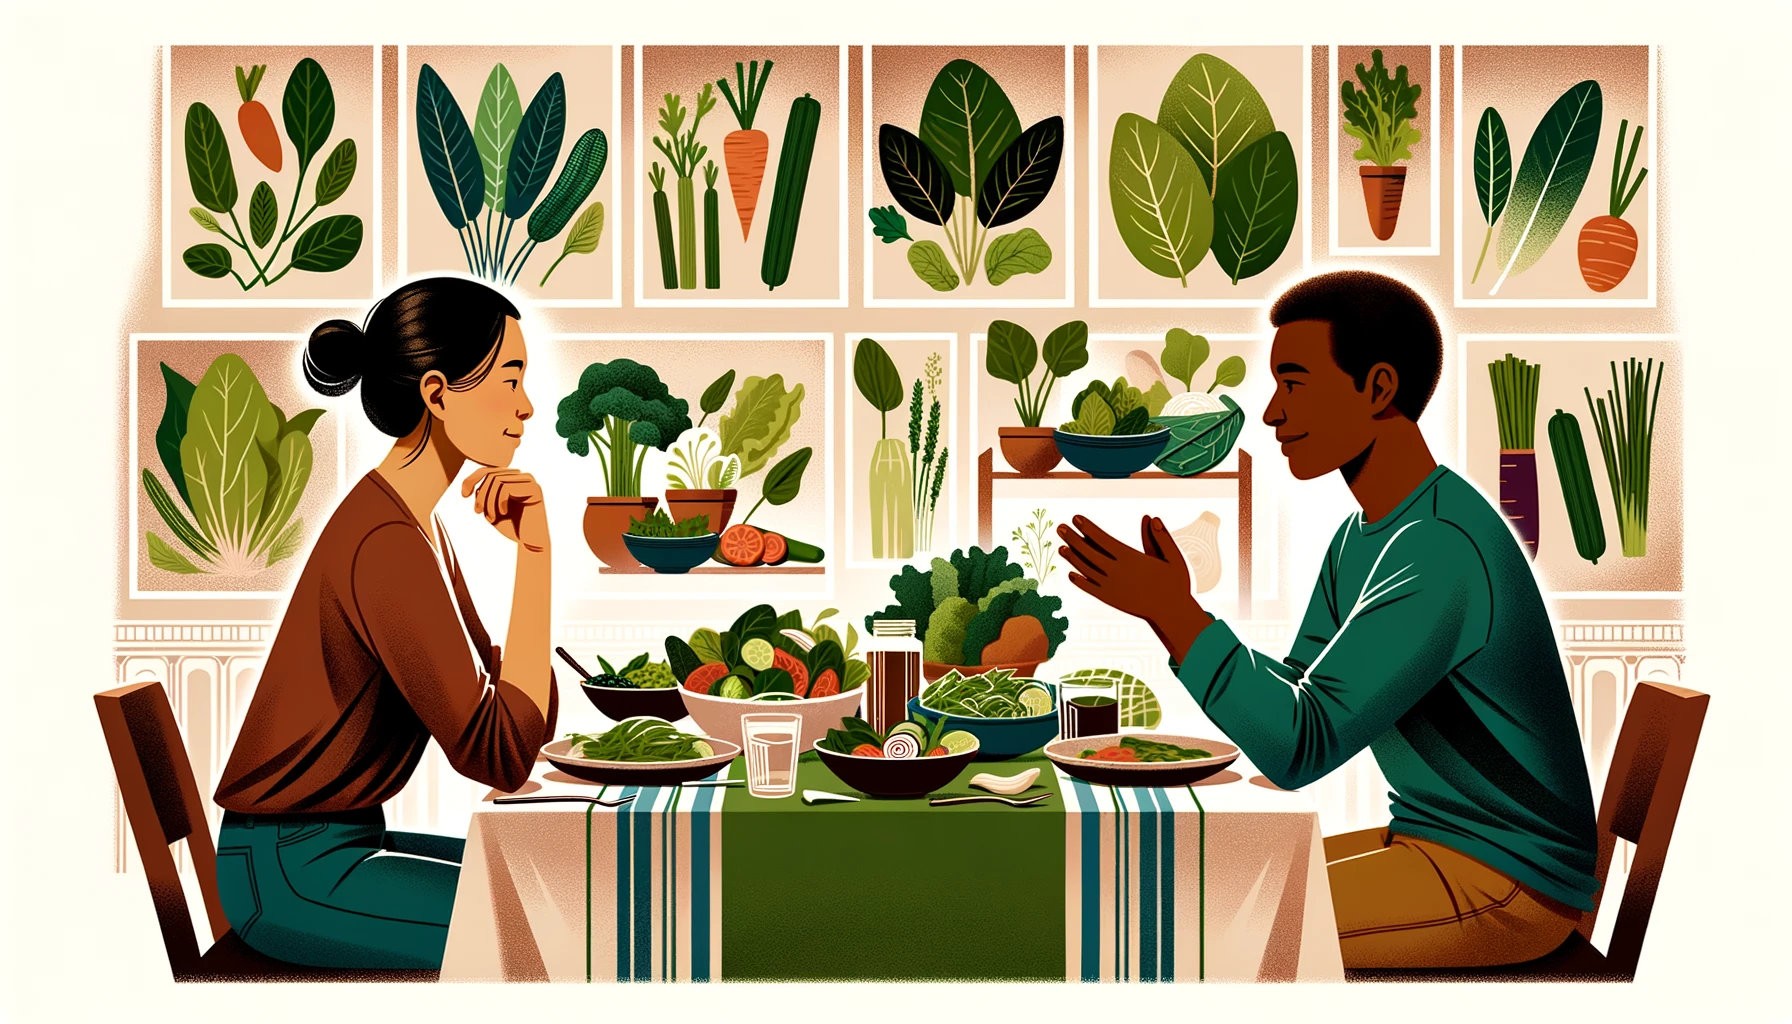 Two individuals from diverse backgrounds discussing nutrition over a table with cultural foods and leafy greens.